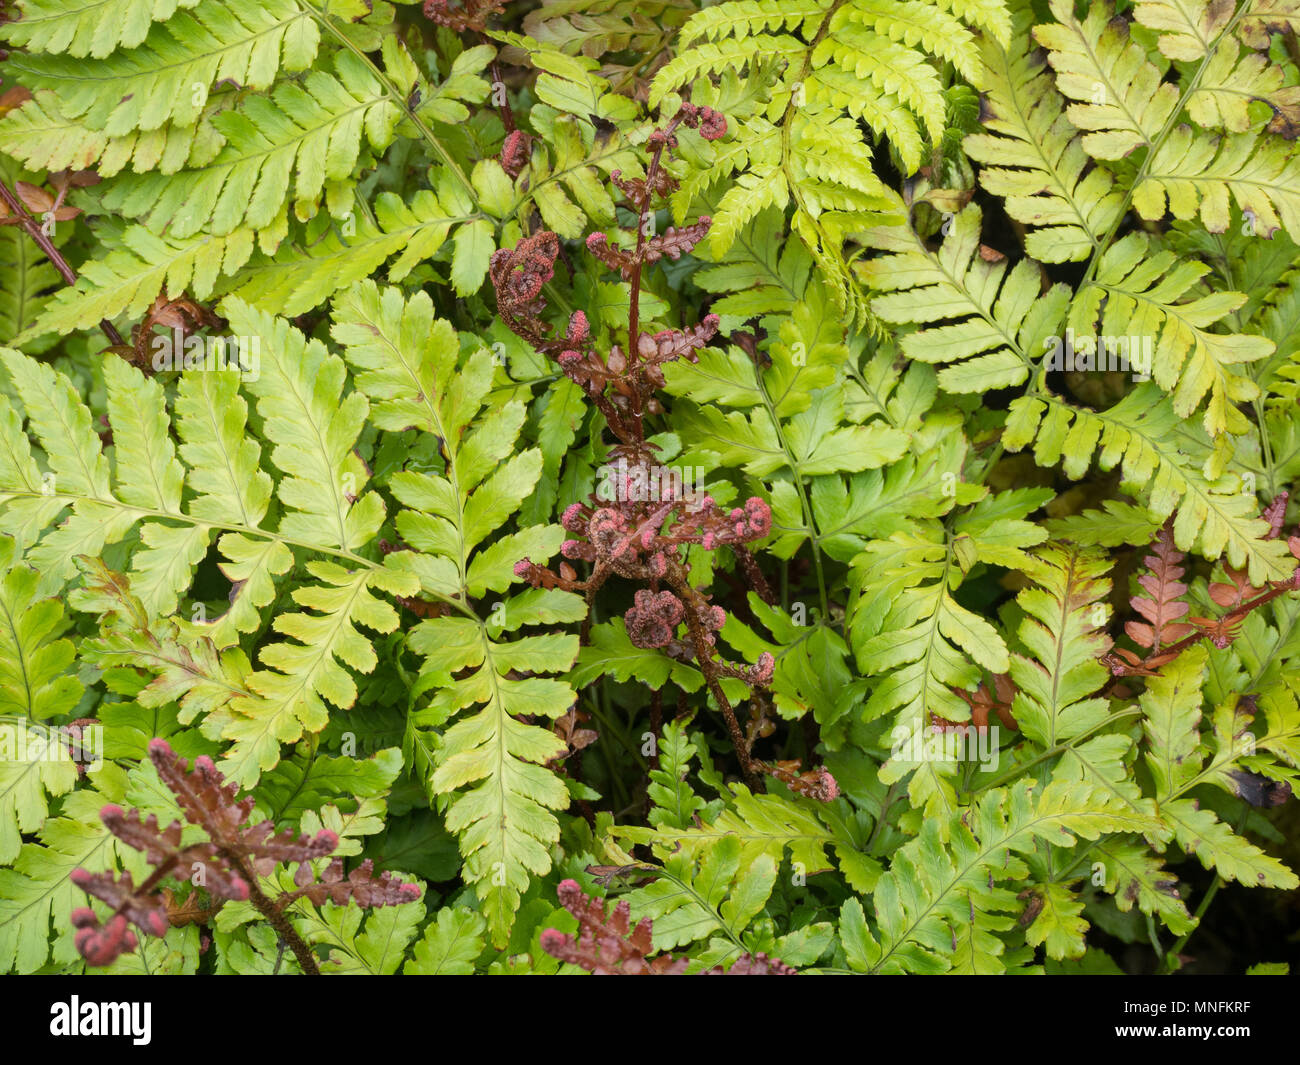 The bright red new fronds on the fern Dtyopteris erythrosora 'Brilliance' standing out against the light green older foliage Stock Photo